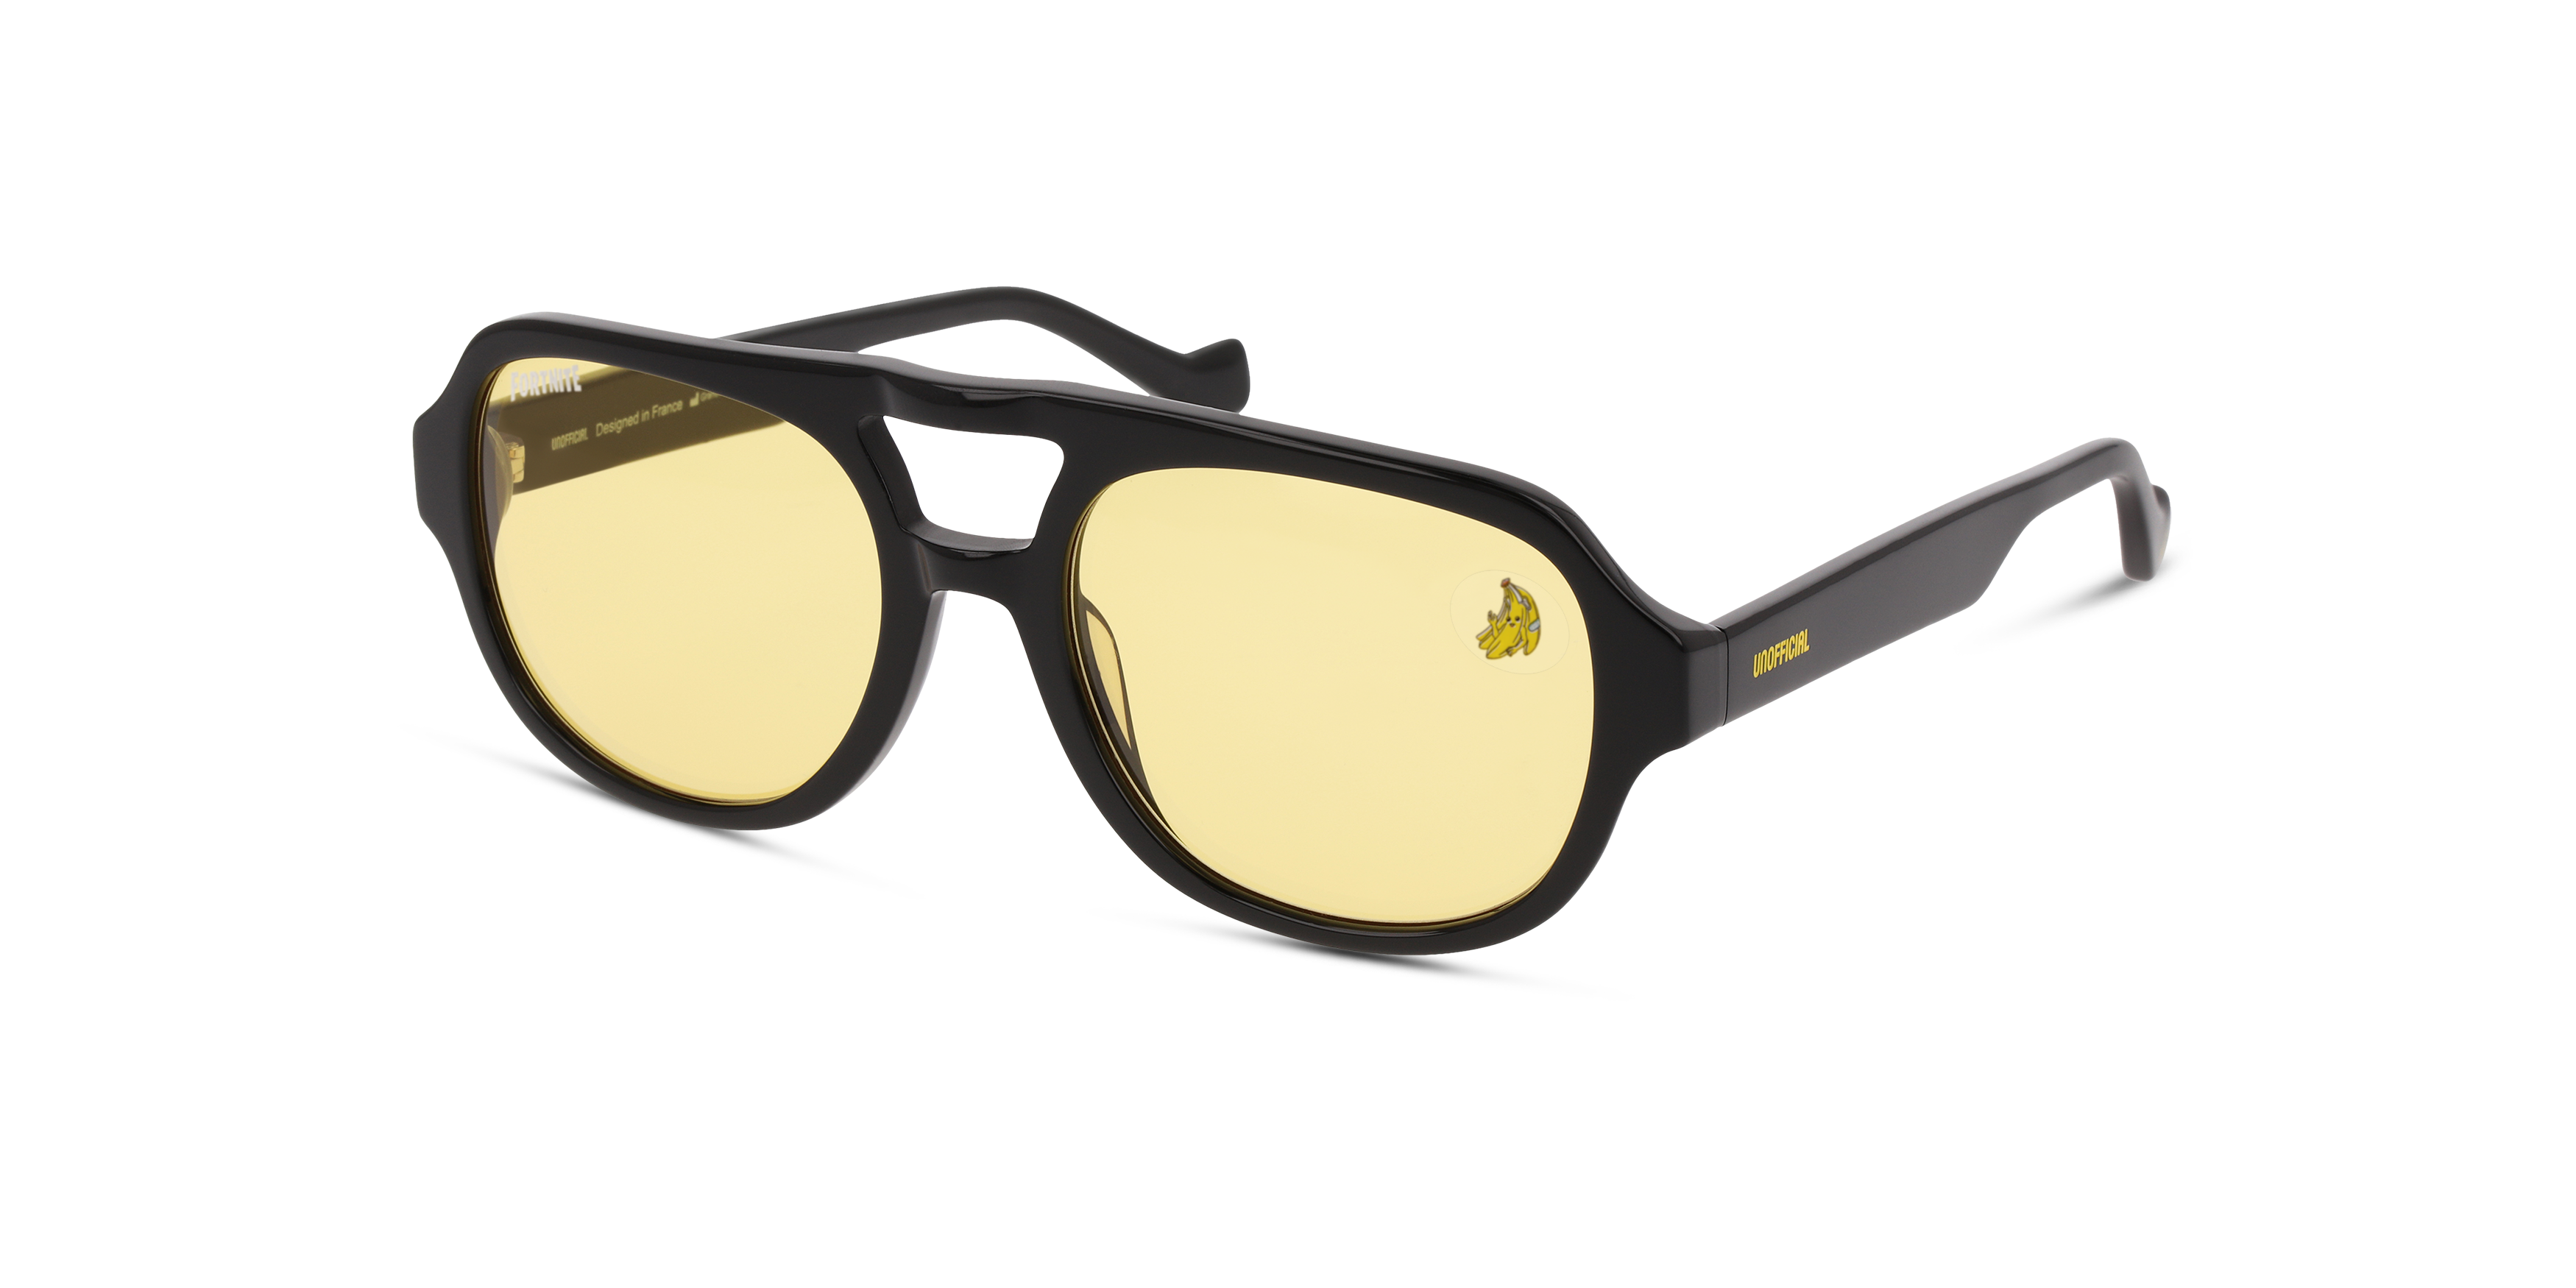 Angle_Left01 Fortnite with Unofficial UNSU0126 (BBY0) Sunglasses Yellow / Black